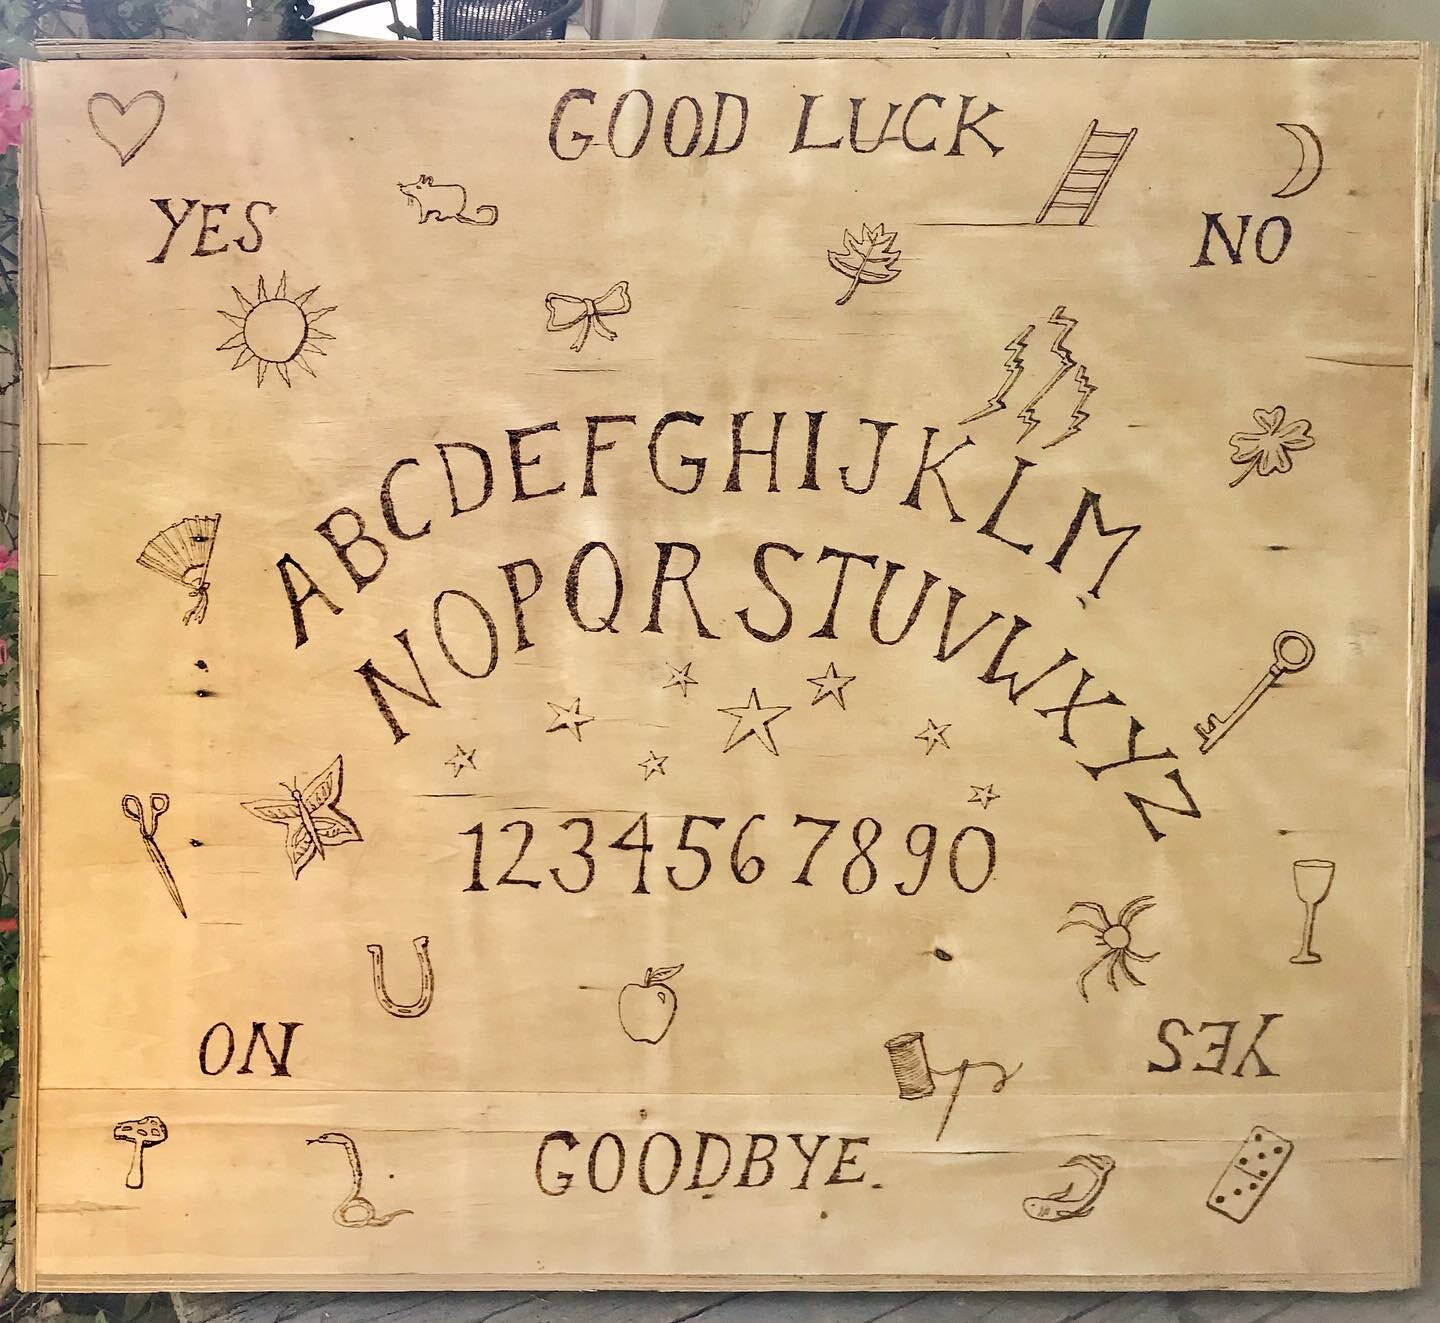 It was very fun to make this ouija board and it was even more freaky fun to use it ✨✨✨